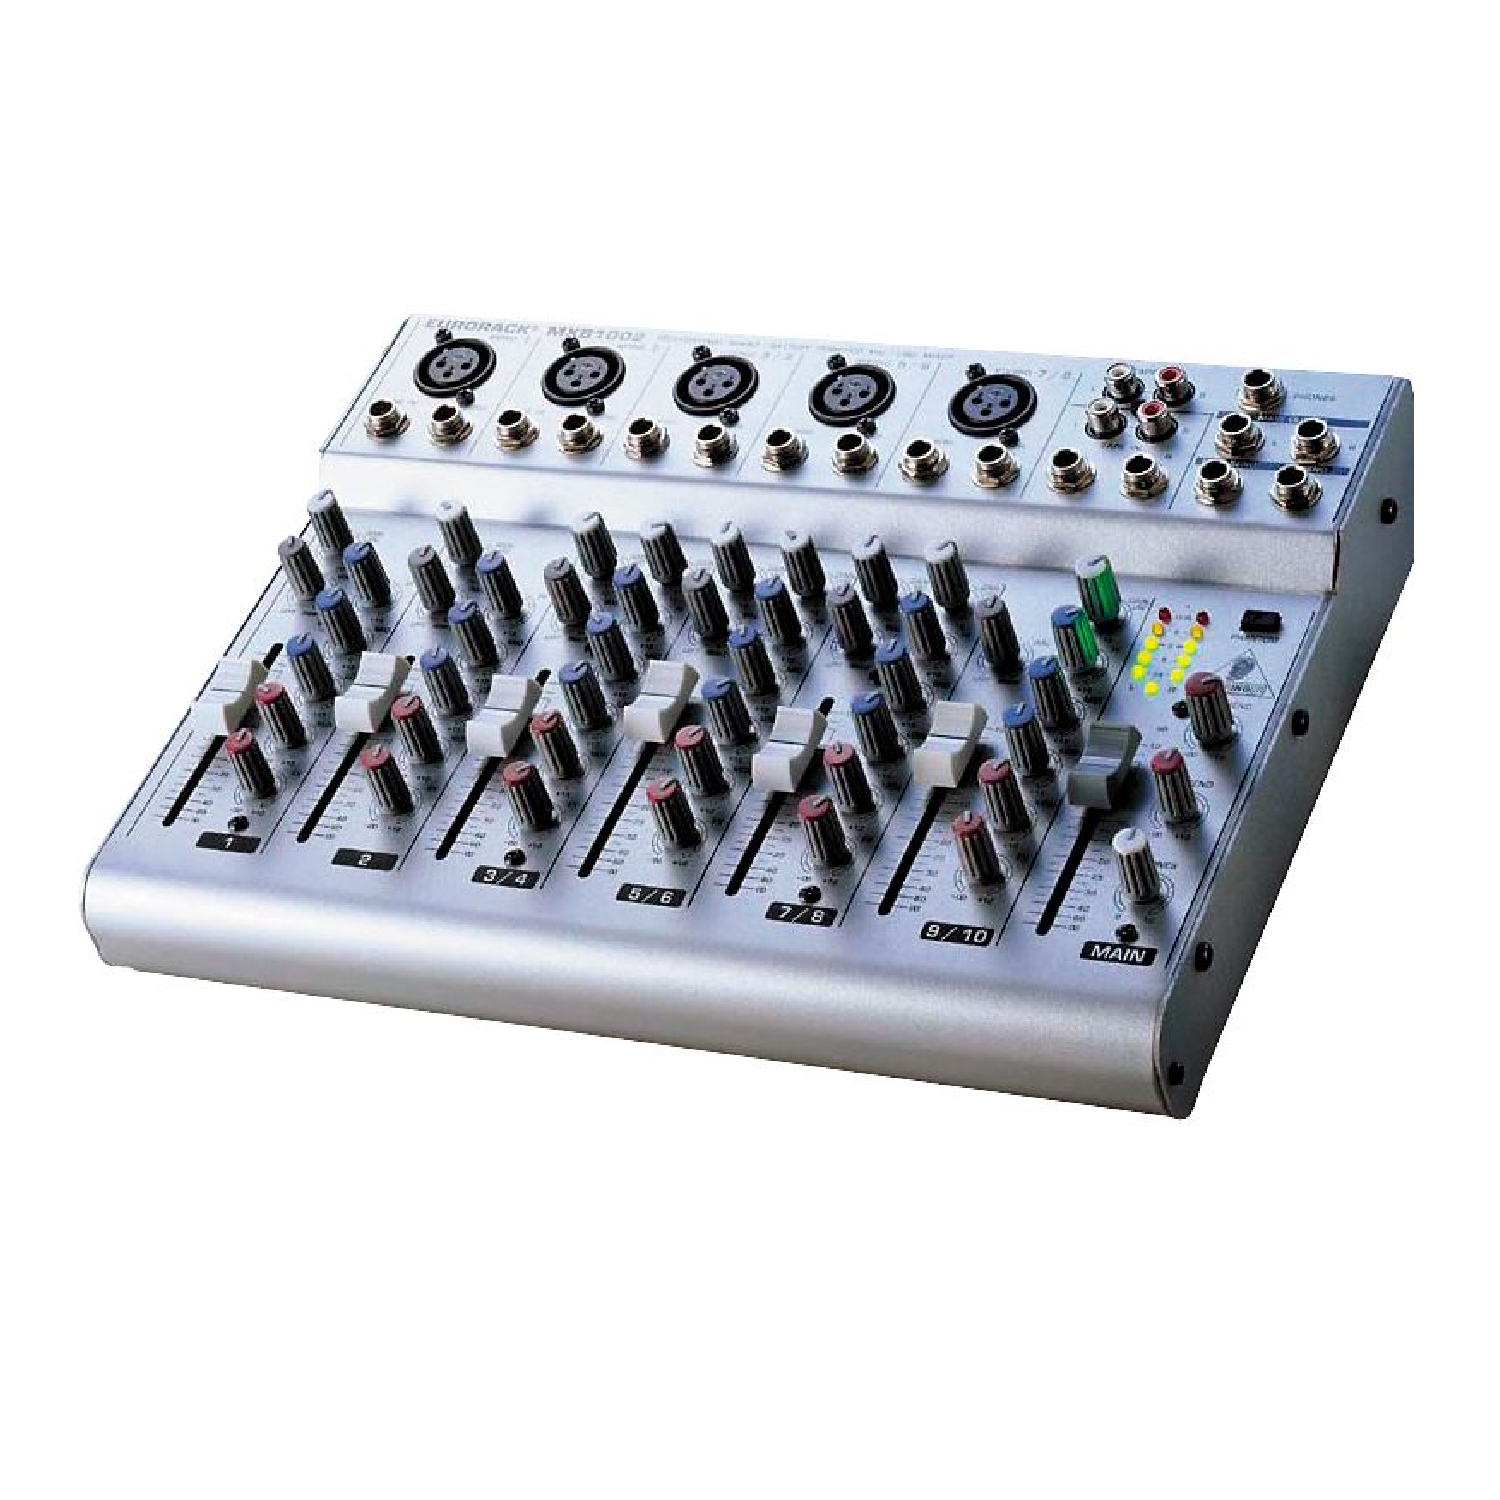 10-Channel Mixing Console with Optional Battery Operation MXB 1002 behringer